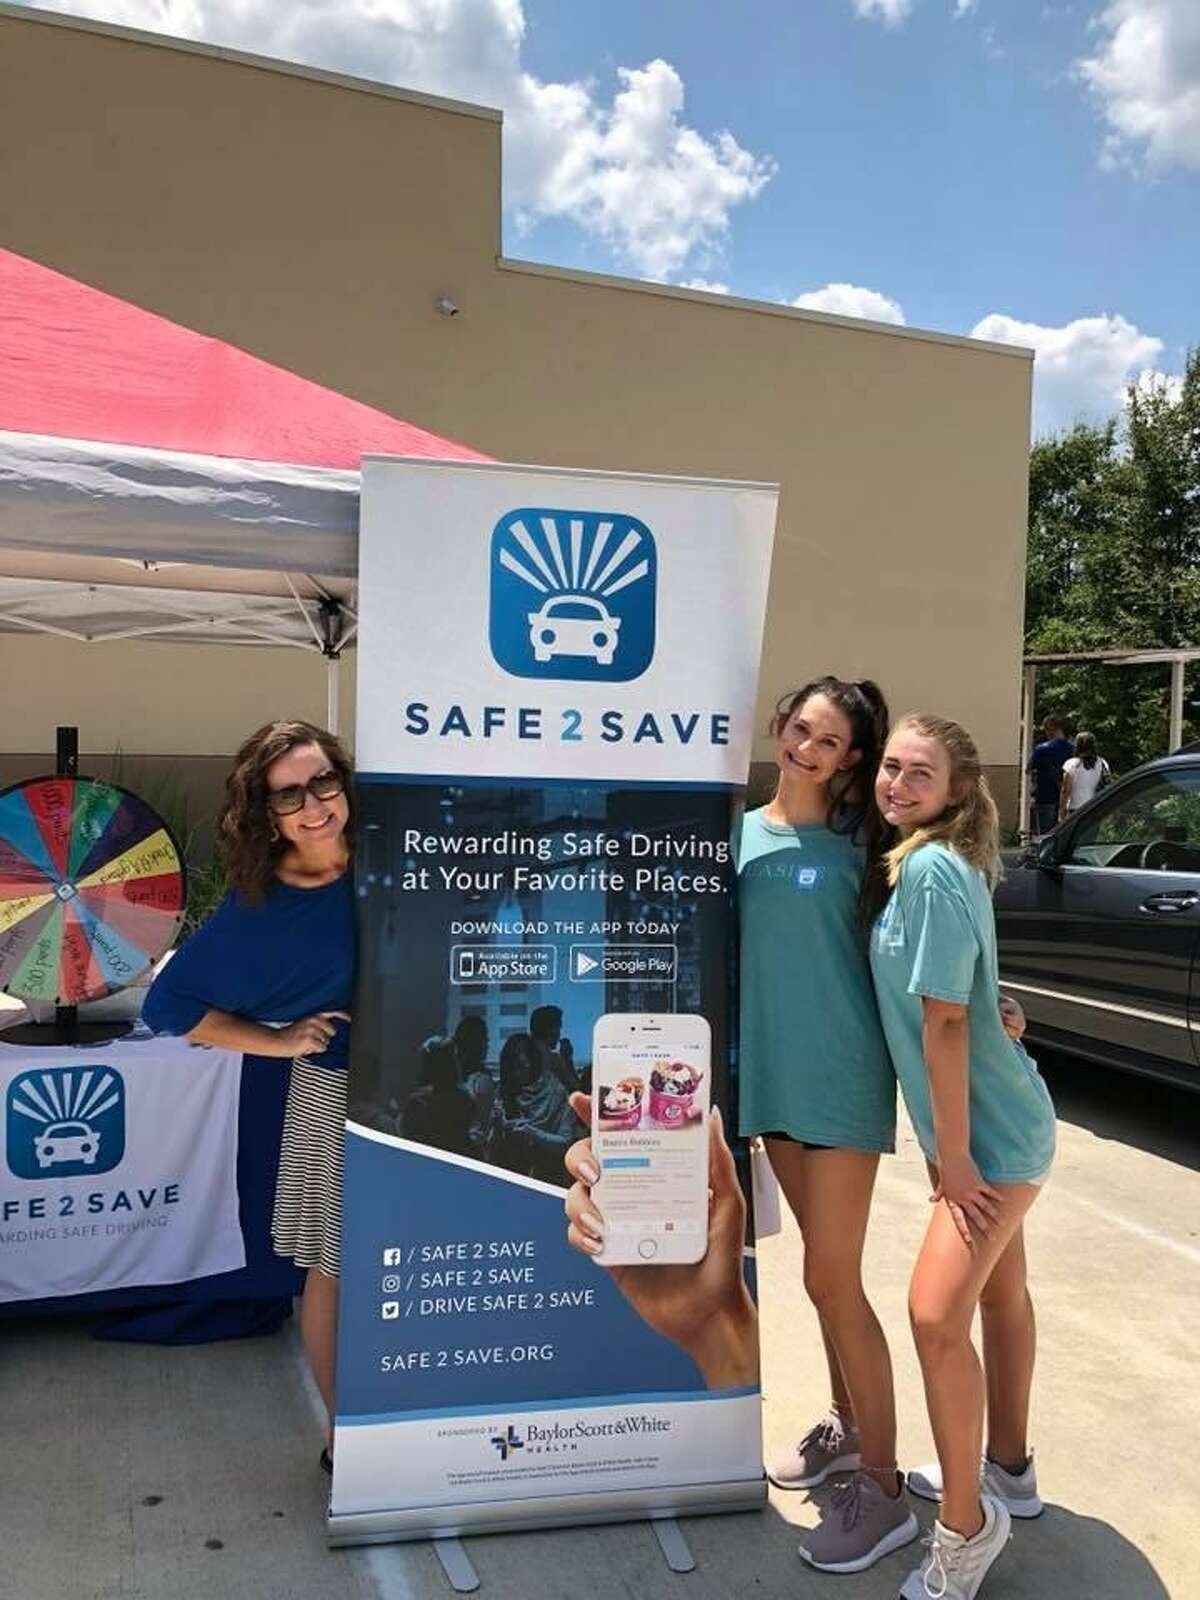 Marci Corry decided to make an impact on safe driving in communities throughout Texas. After researching behavior change and observing that her young children responded well with positive reinforcement, Corry decided to encourage people in a positive way to stay off their phones while driving. She founded SAFE 2 SAVE in October 2016. In just two years, the app has gained a lot of popularity with over 89,000 users. Businesses on the app are in many cities throughout Texas, including at Dairy Queen in The Woodlands, with plans to expand across the entire state of Texas and go nationwide.